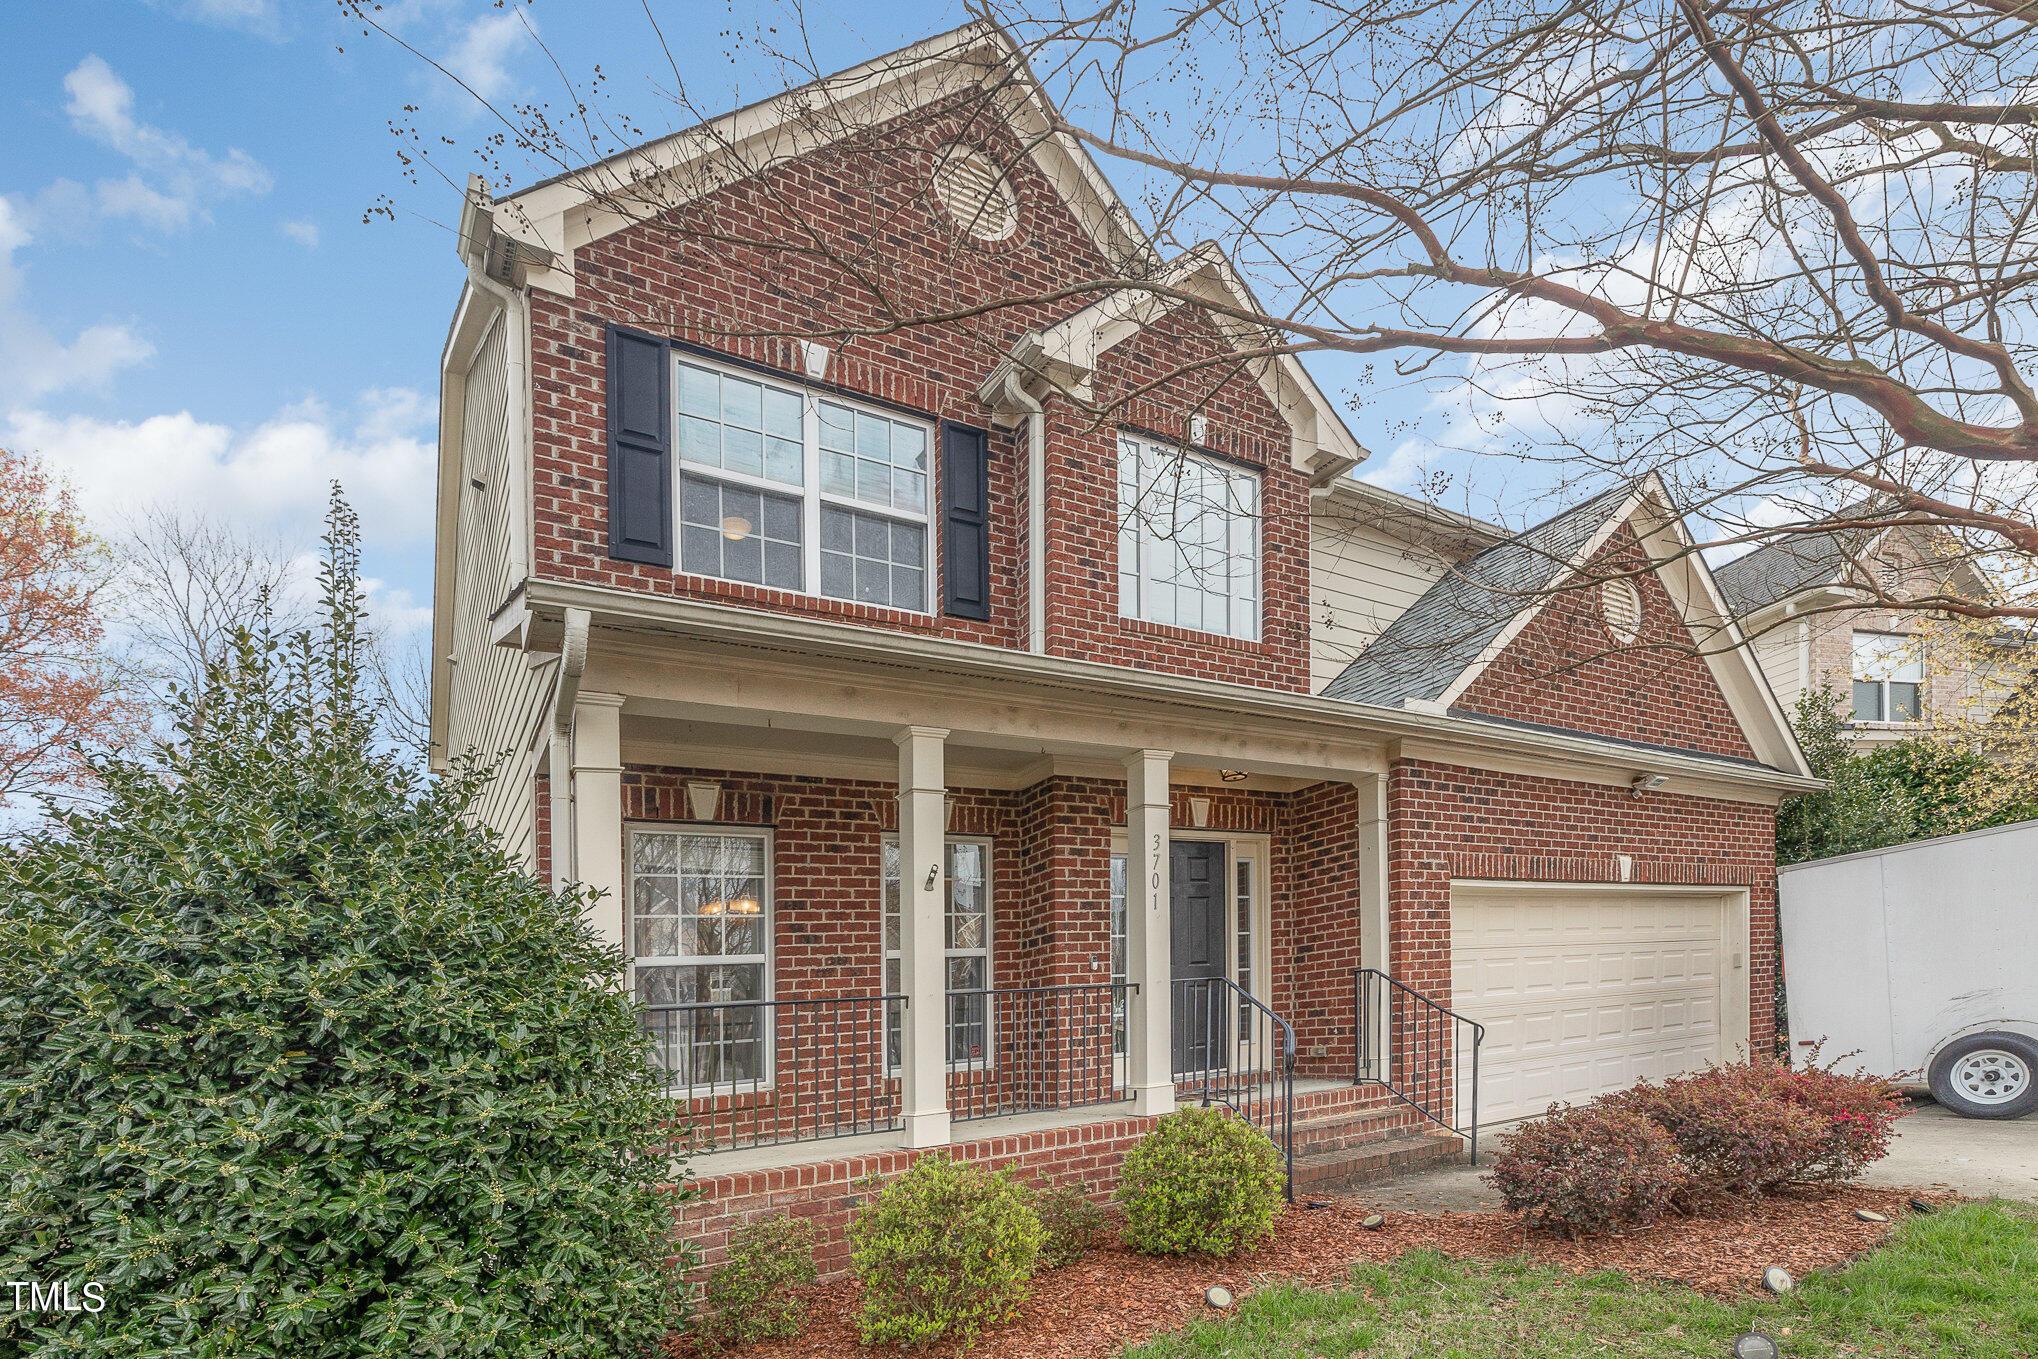 Photo one of 3701 Willow Stone Ln Wake Forest NC 27587 | MLS 10019667